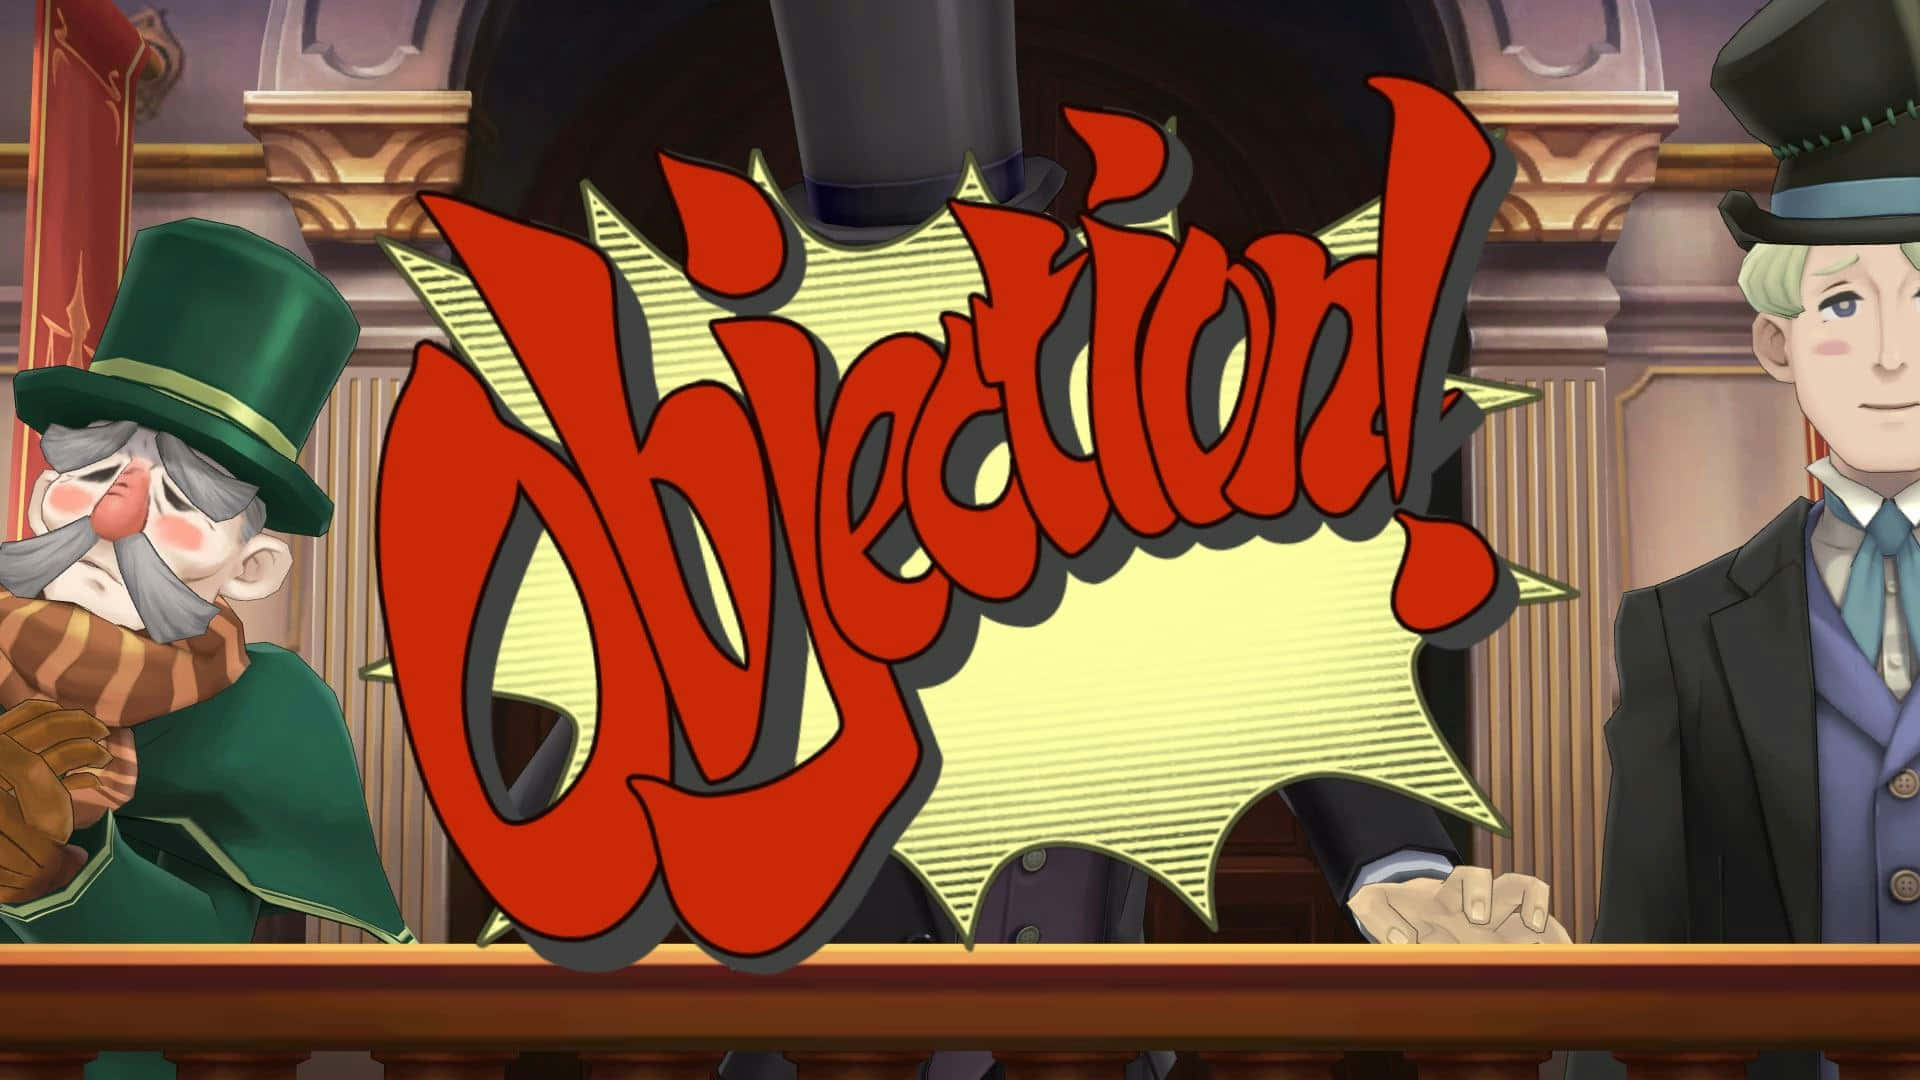 Courtroom Objection Animated Scene Wallpaper